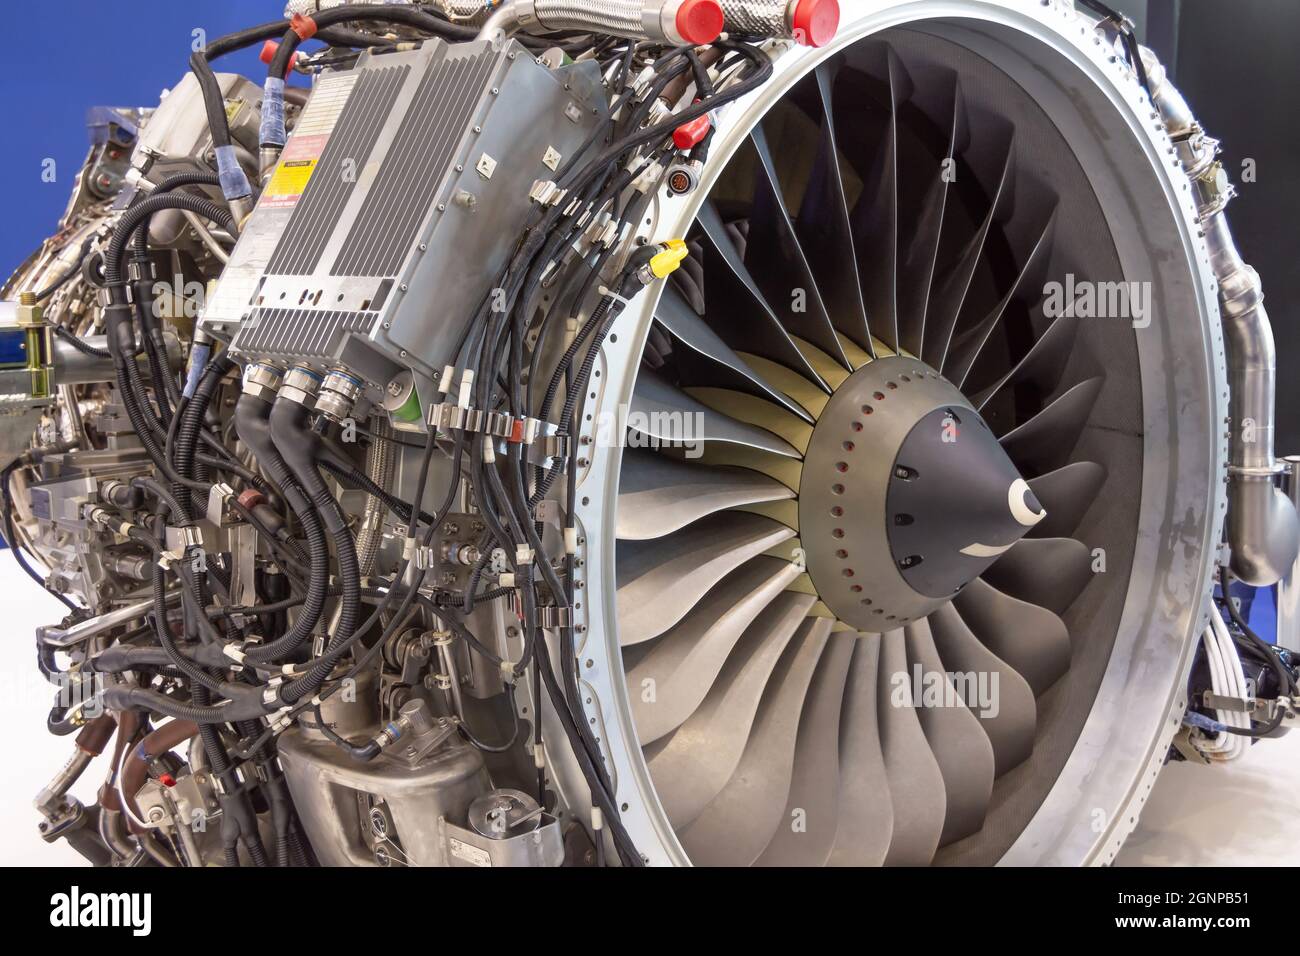 Aircraft engine turbine blades turbo fan, open hood tube air and fuel supply system Stock Photo